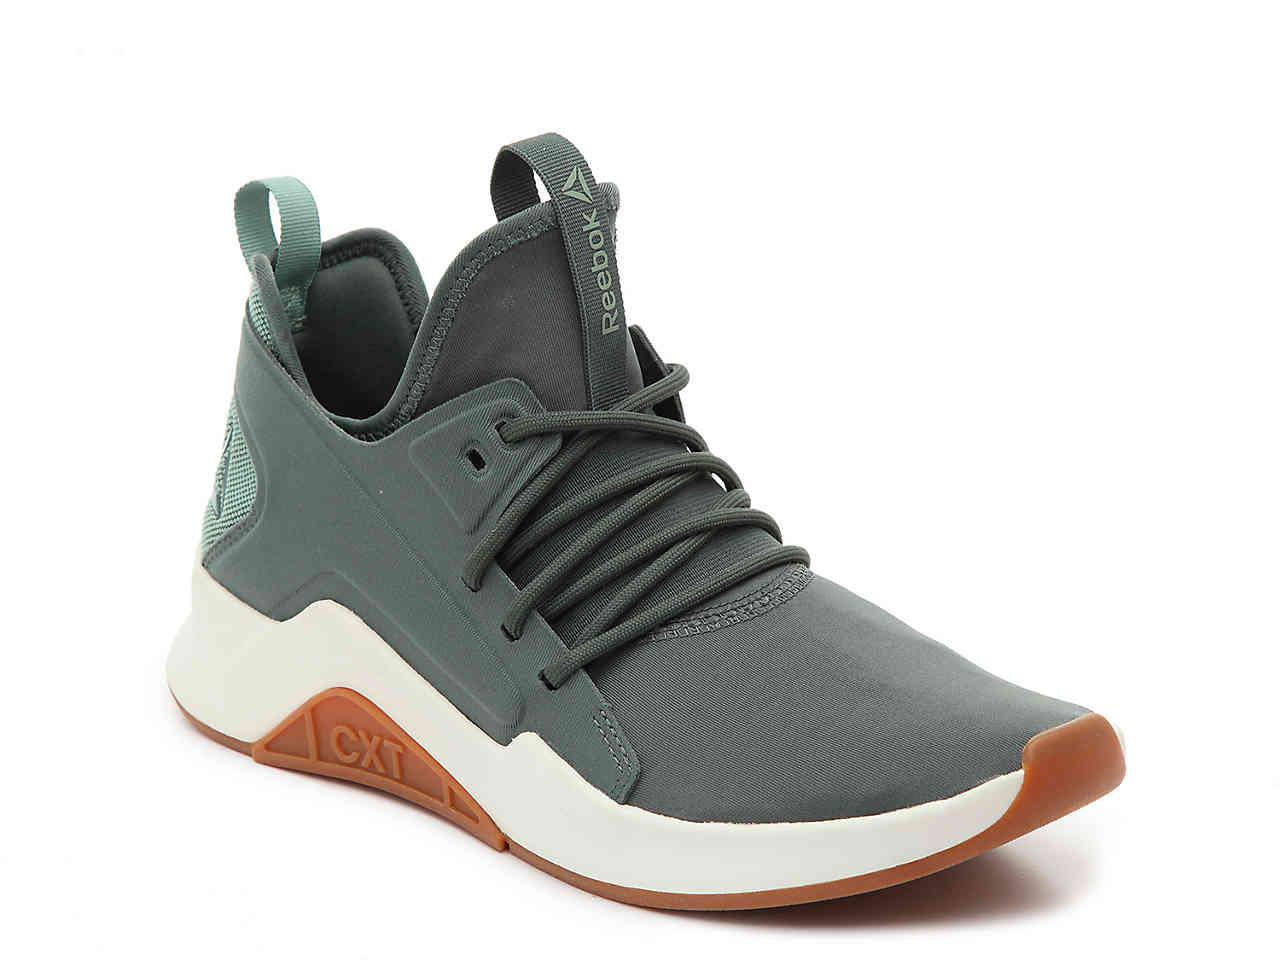 Training Shoe in Olive Green 